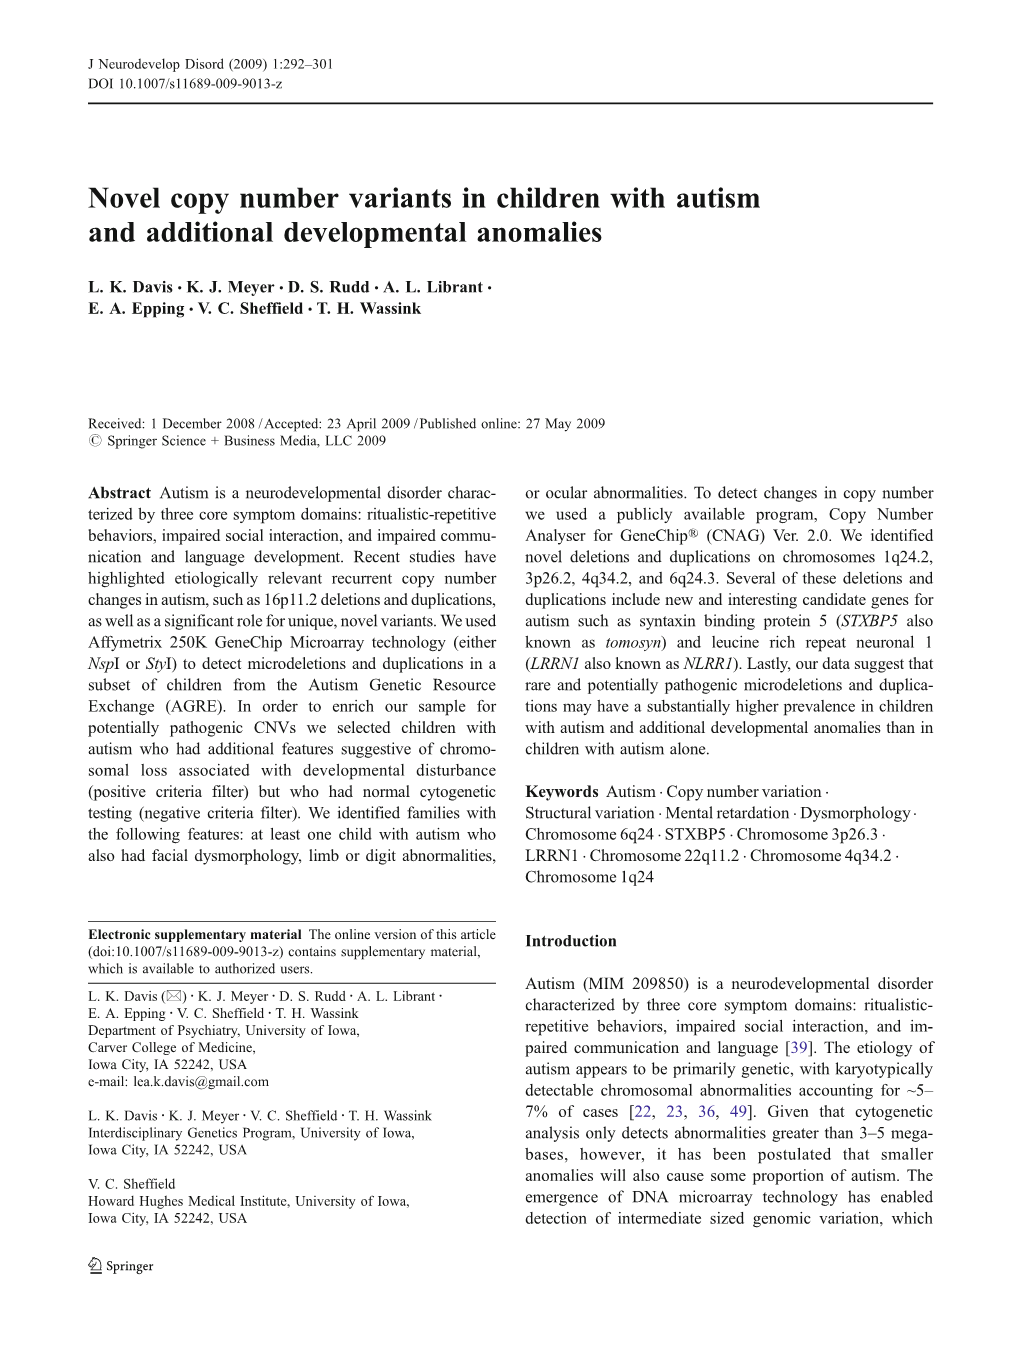 Novel Copy Number Variants in Children with Autism and Additional Developmental Anomalies